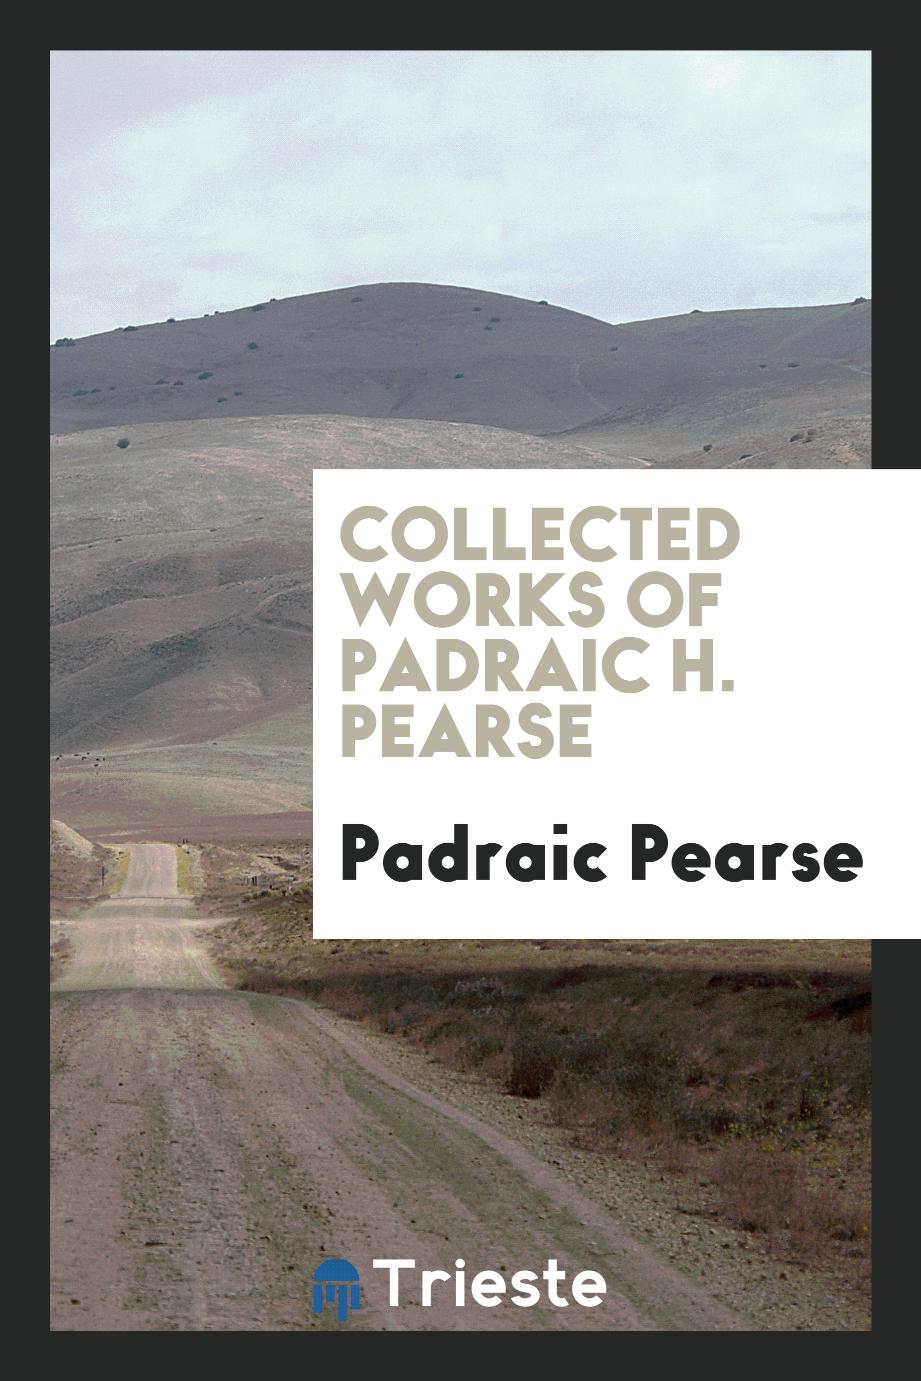 Collected works of Padraic H. Pearse